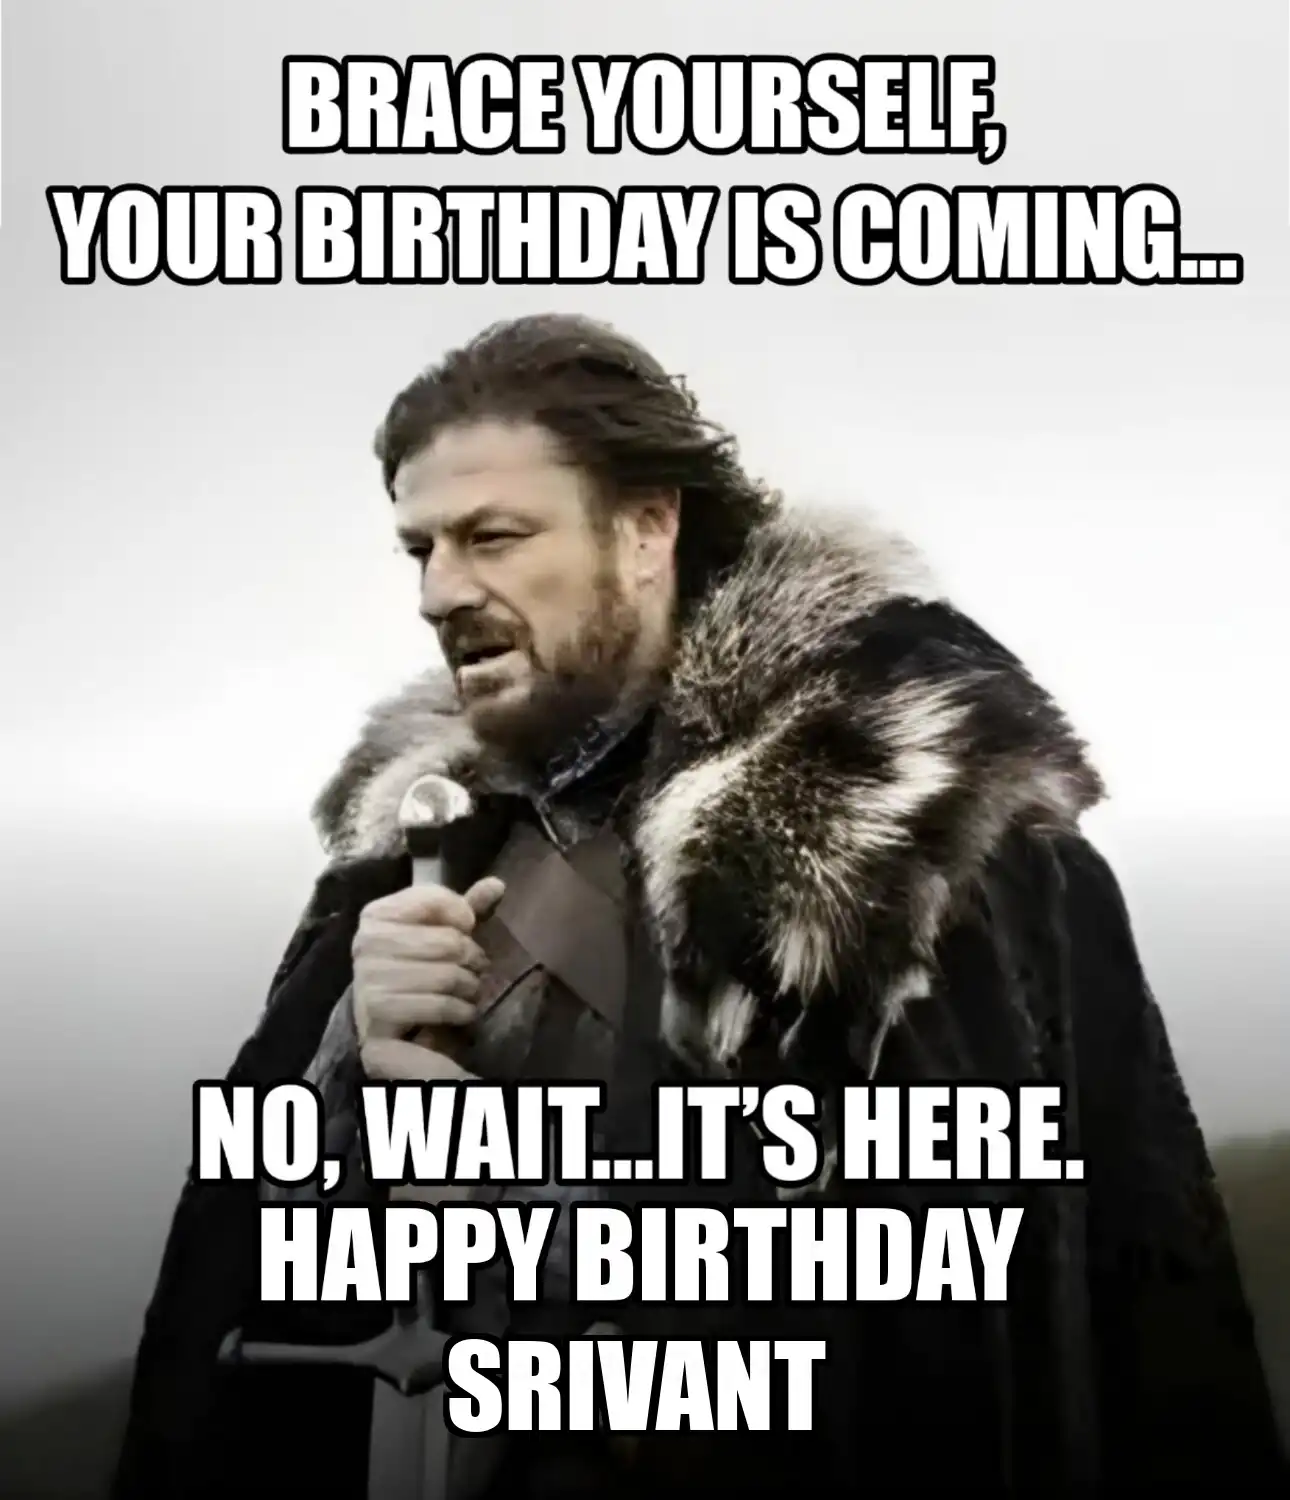 Happy Birthday Srivant Brace Yourself Your Birthday Is Coming Meme